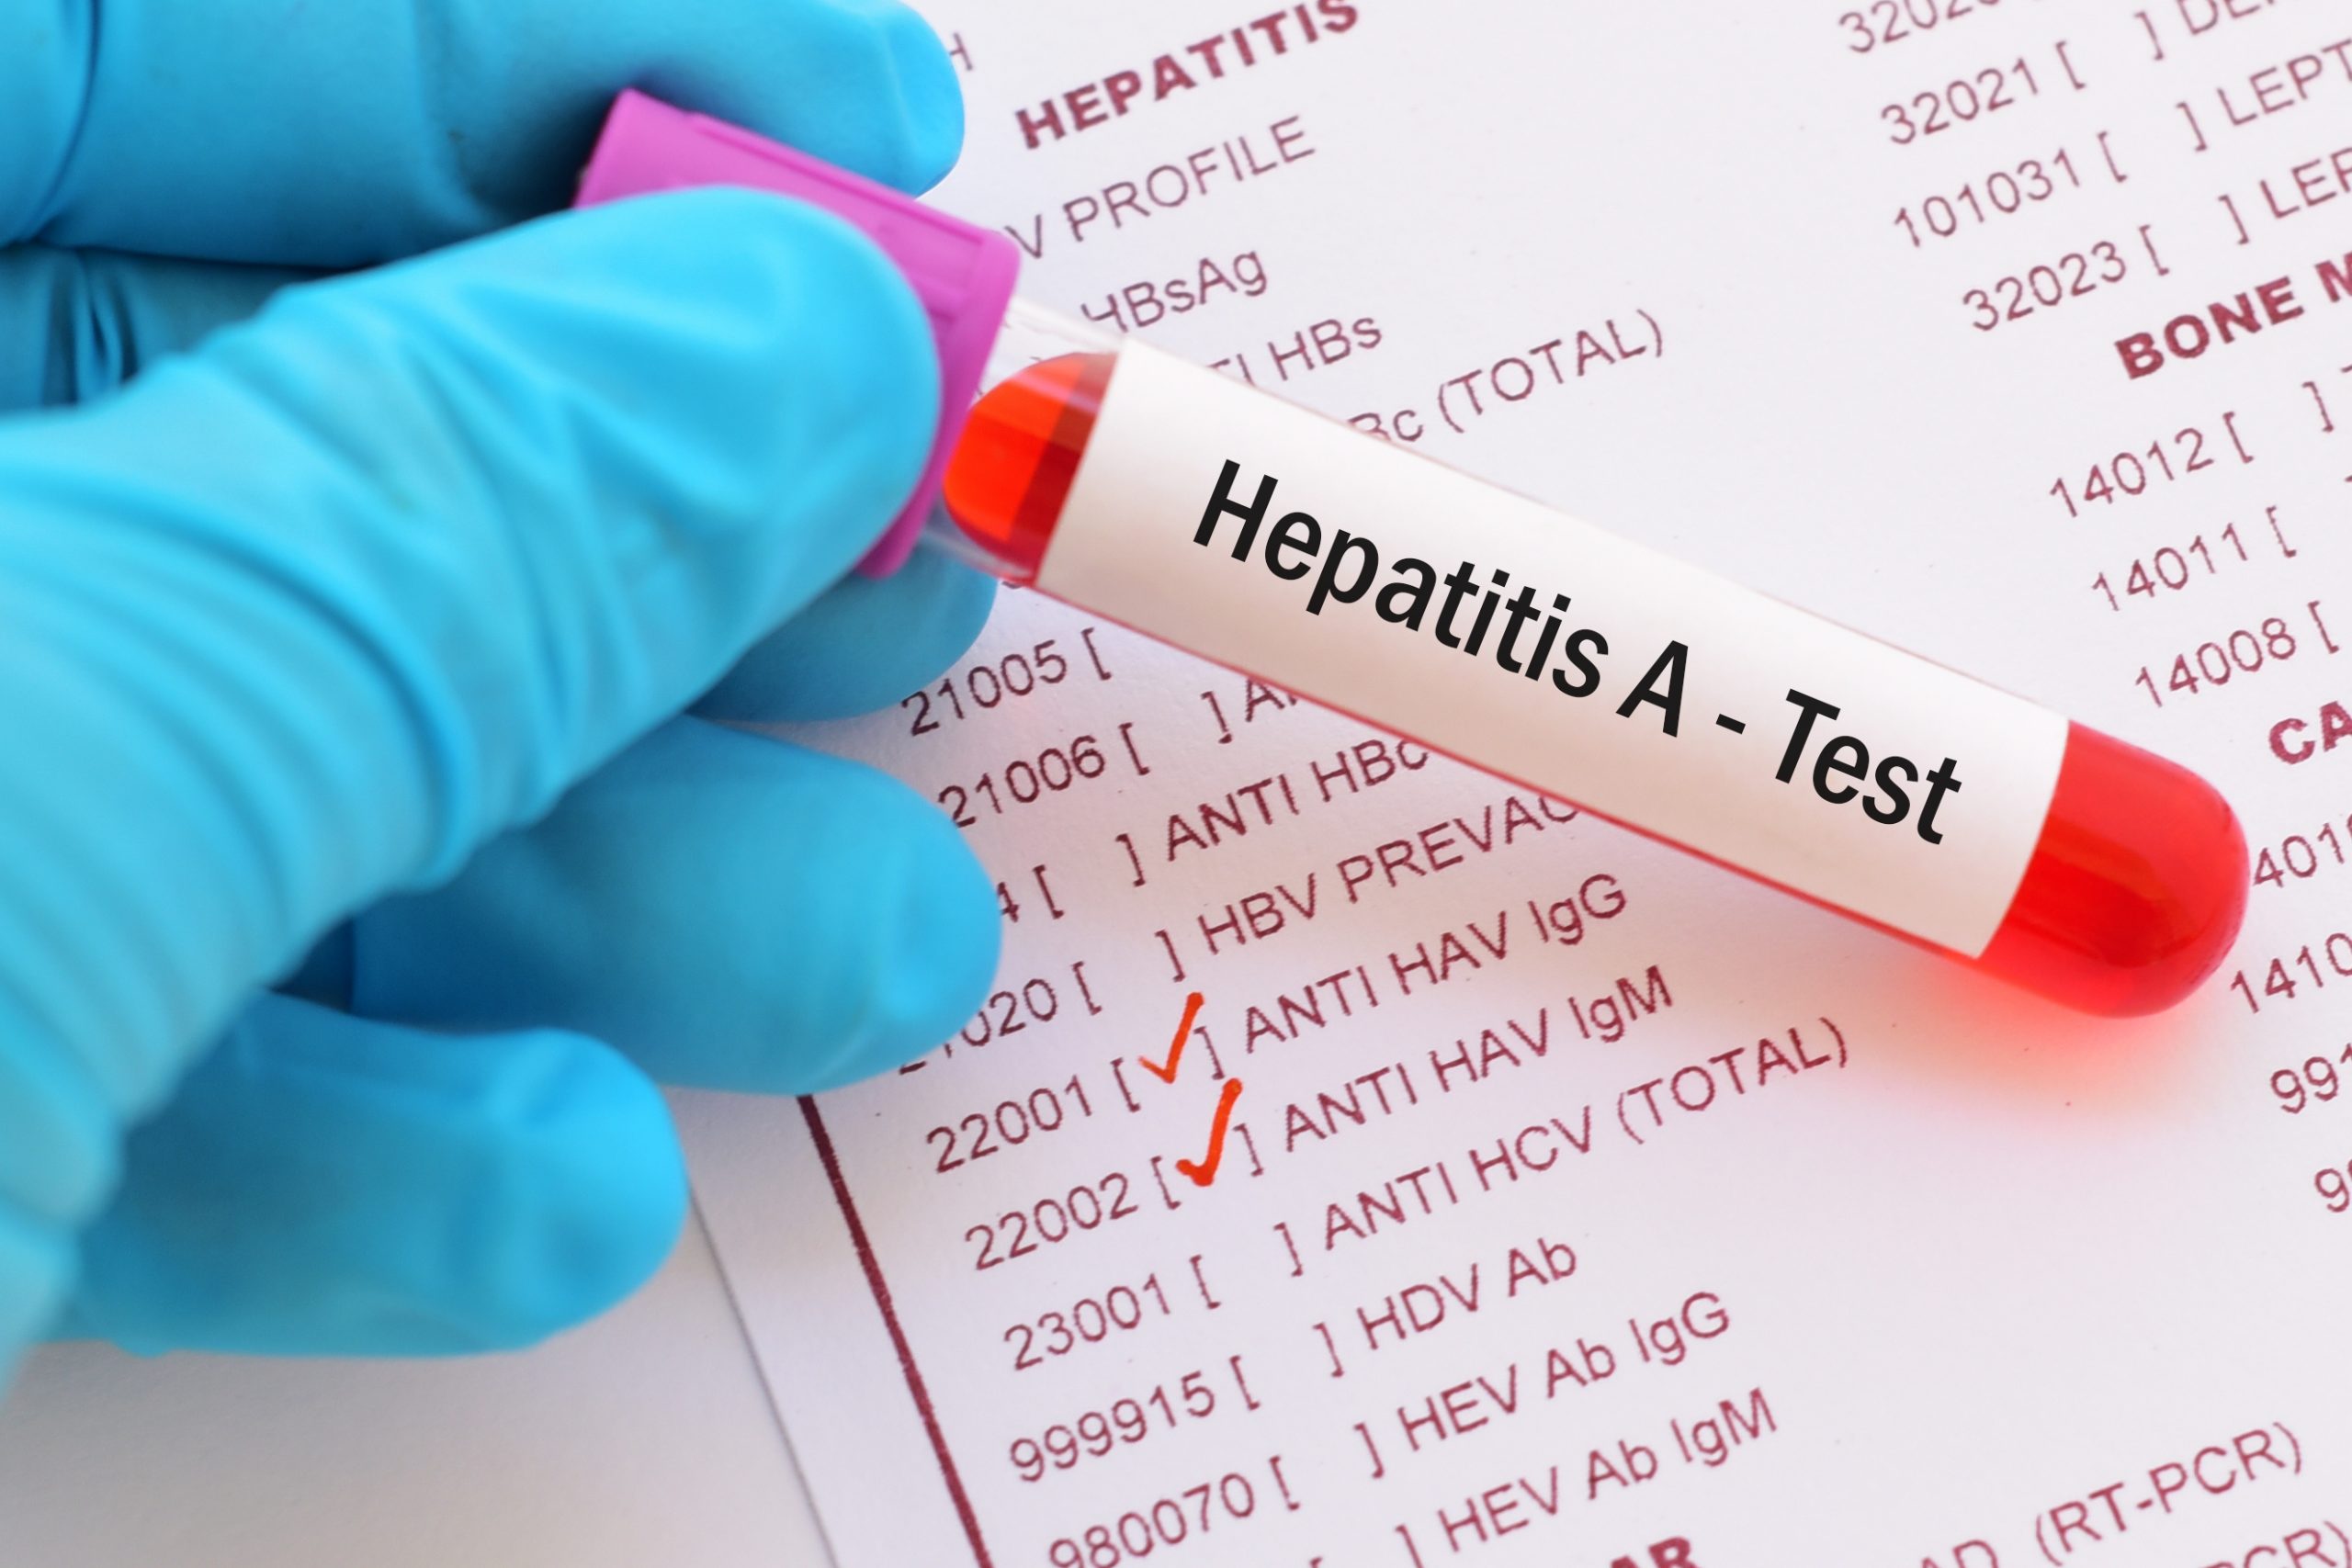 Hepatitis A Diagnosis and Treatment